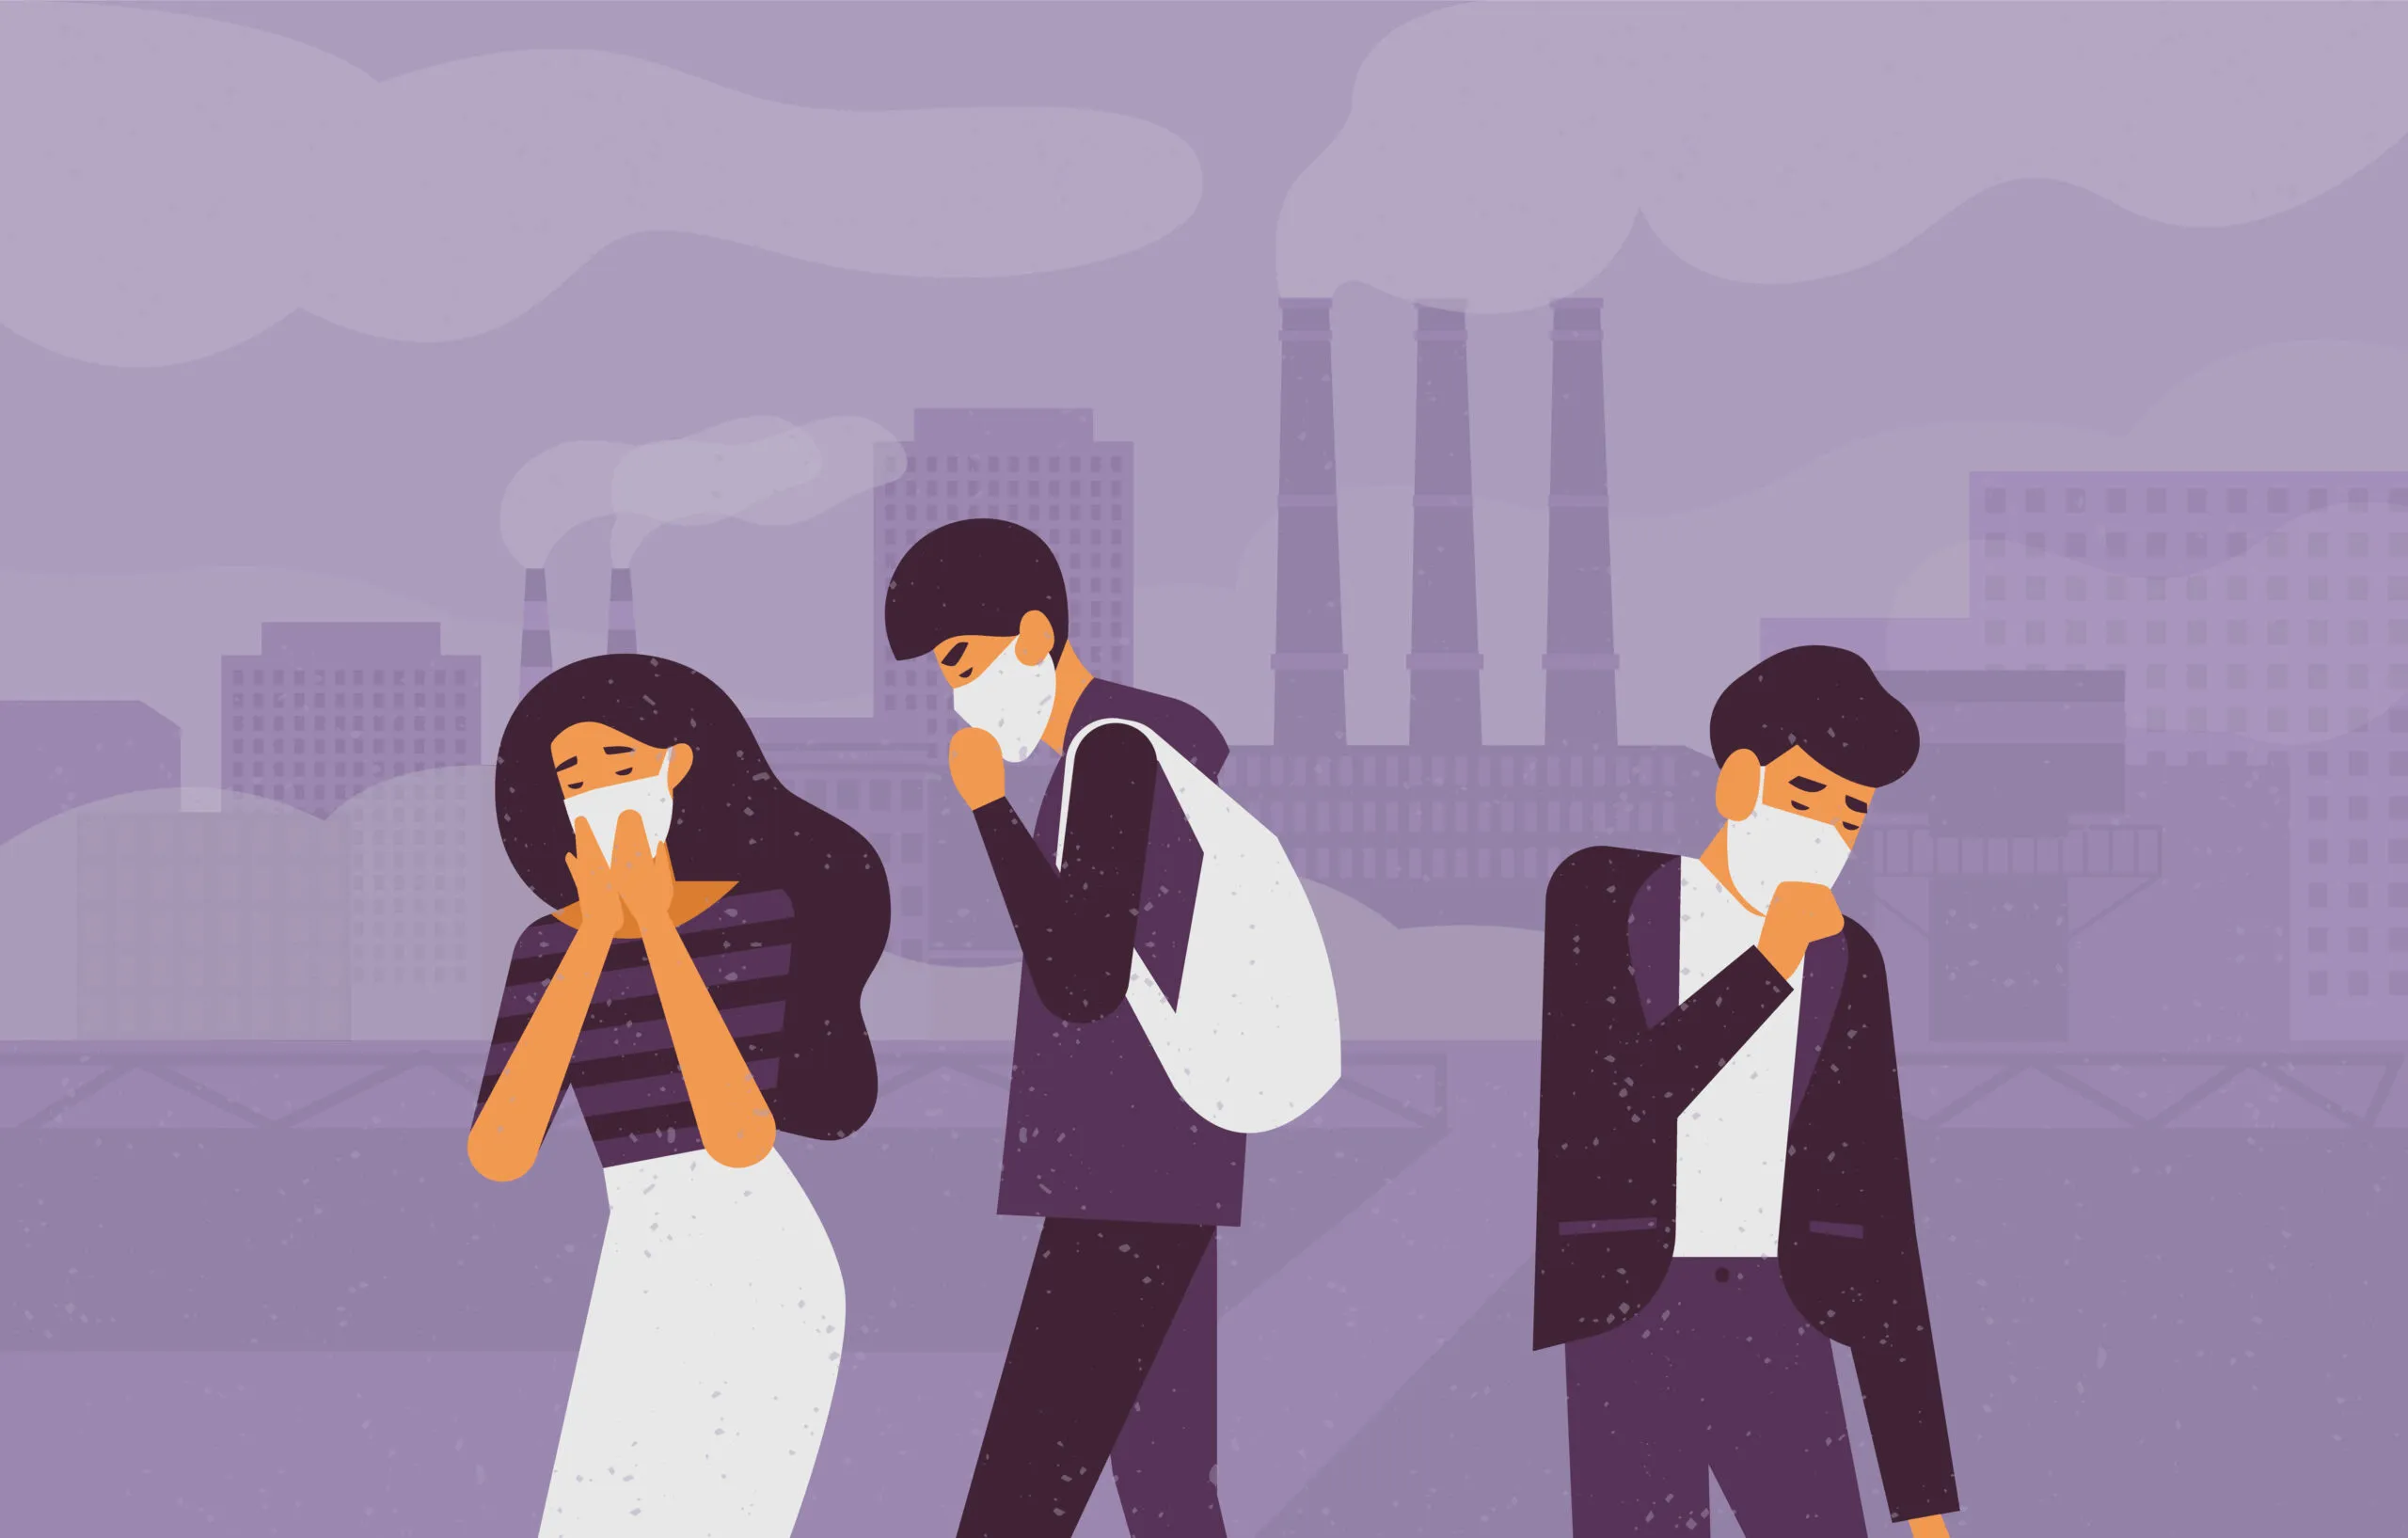 Air Pollution Harms the Brain and Mental Health, Too – A Large-Scale Analysis Documents Effects on Brain Regions Associated With Emotions